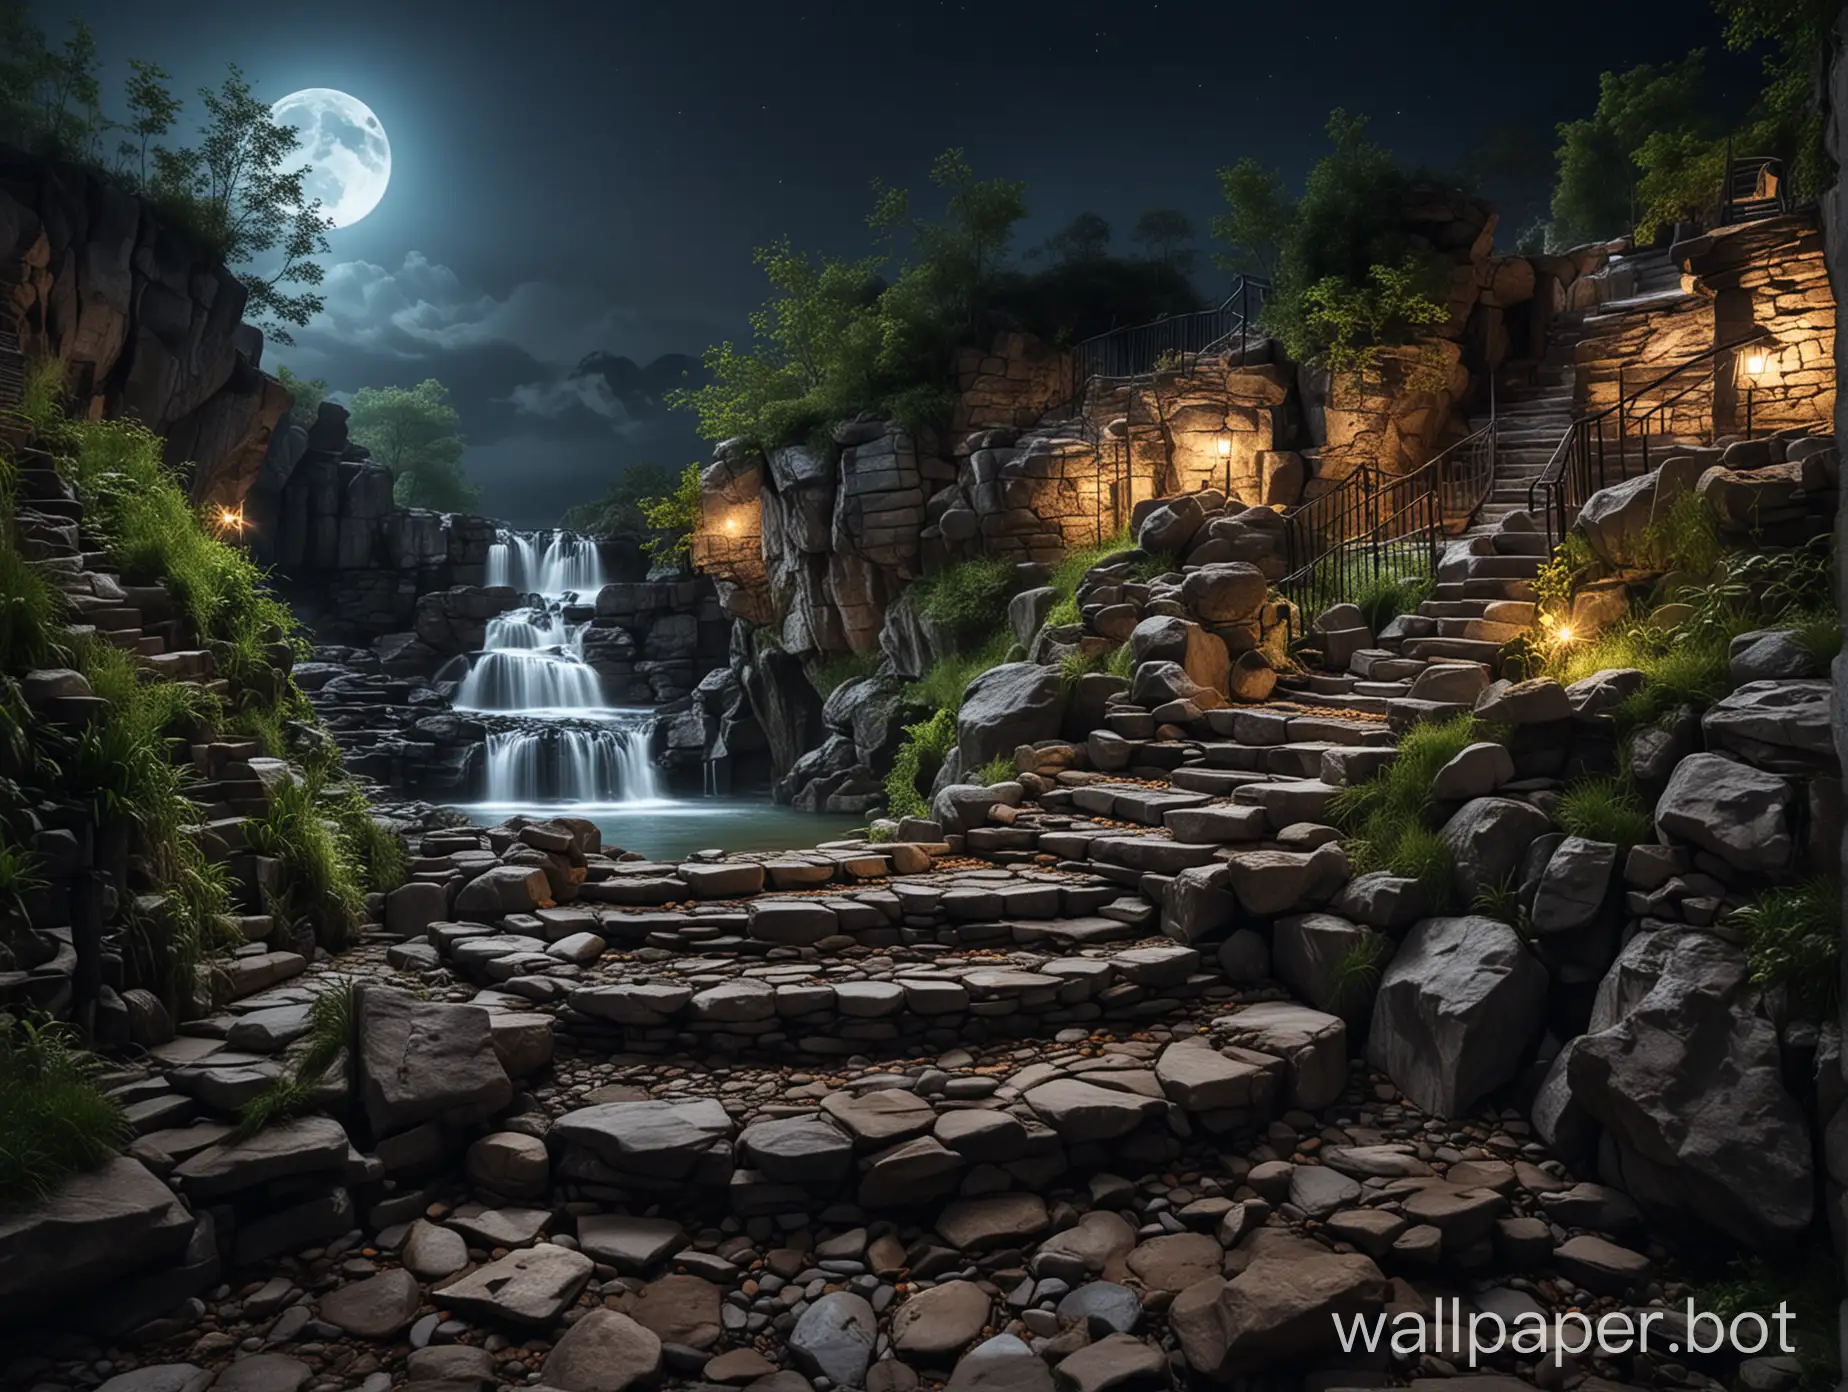 Night mystical landscape. Rocks with waterfalls and stone stairs between the terraces.